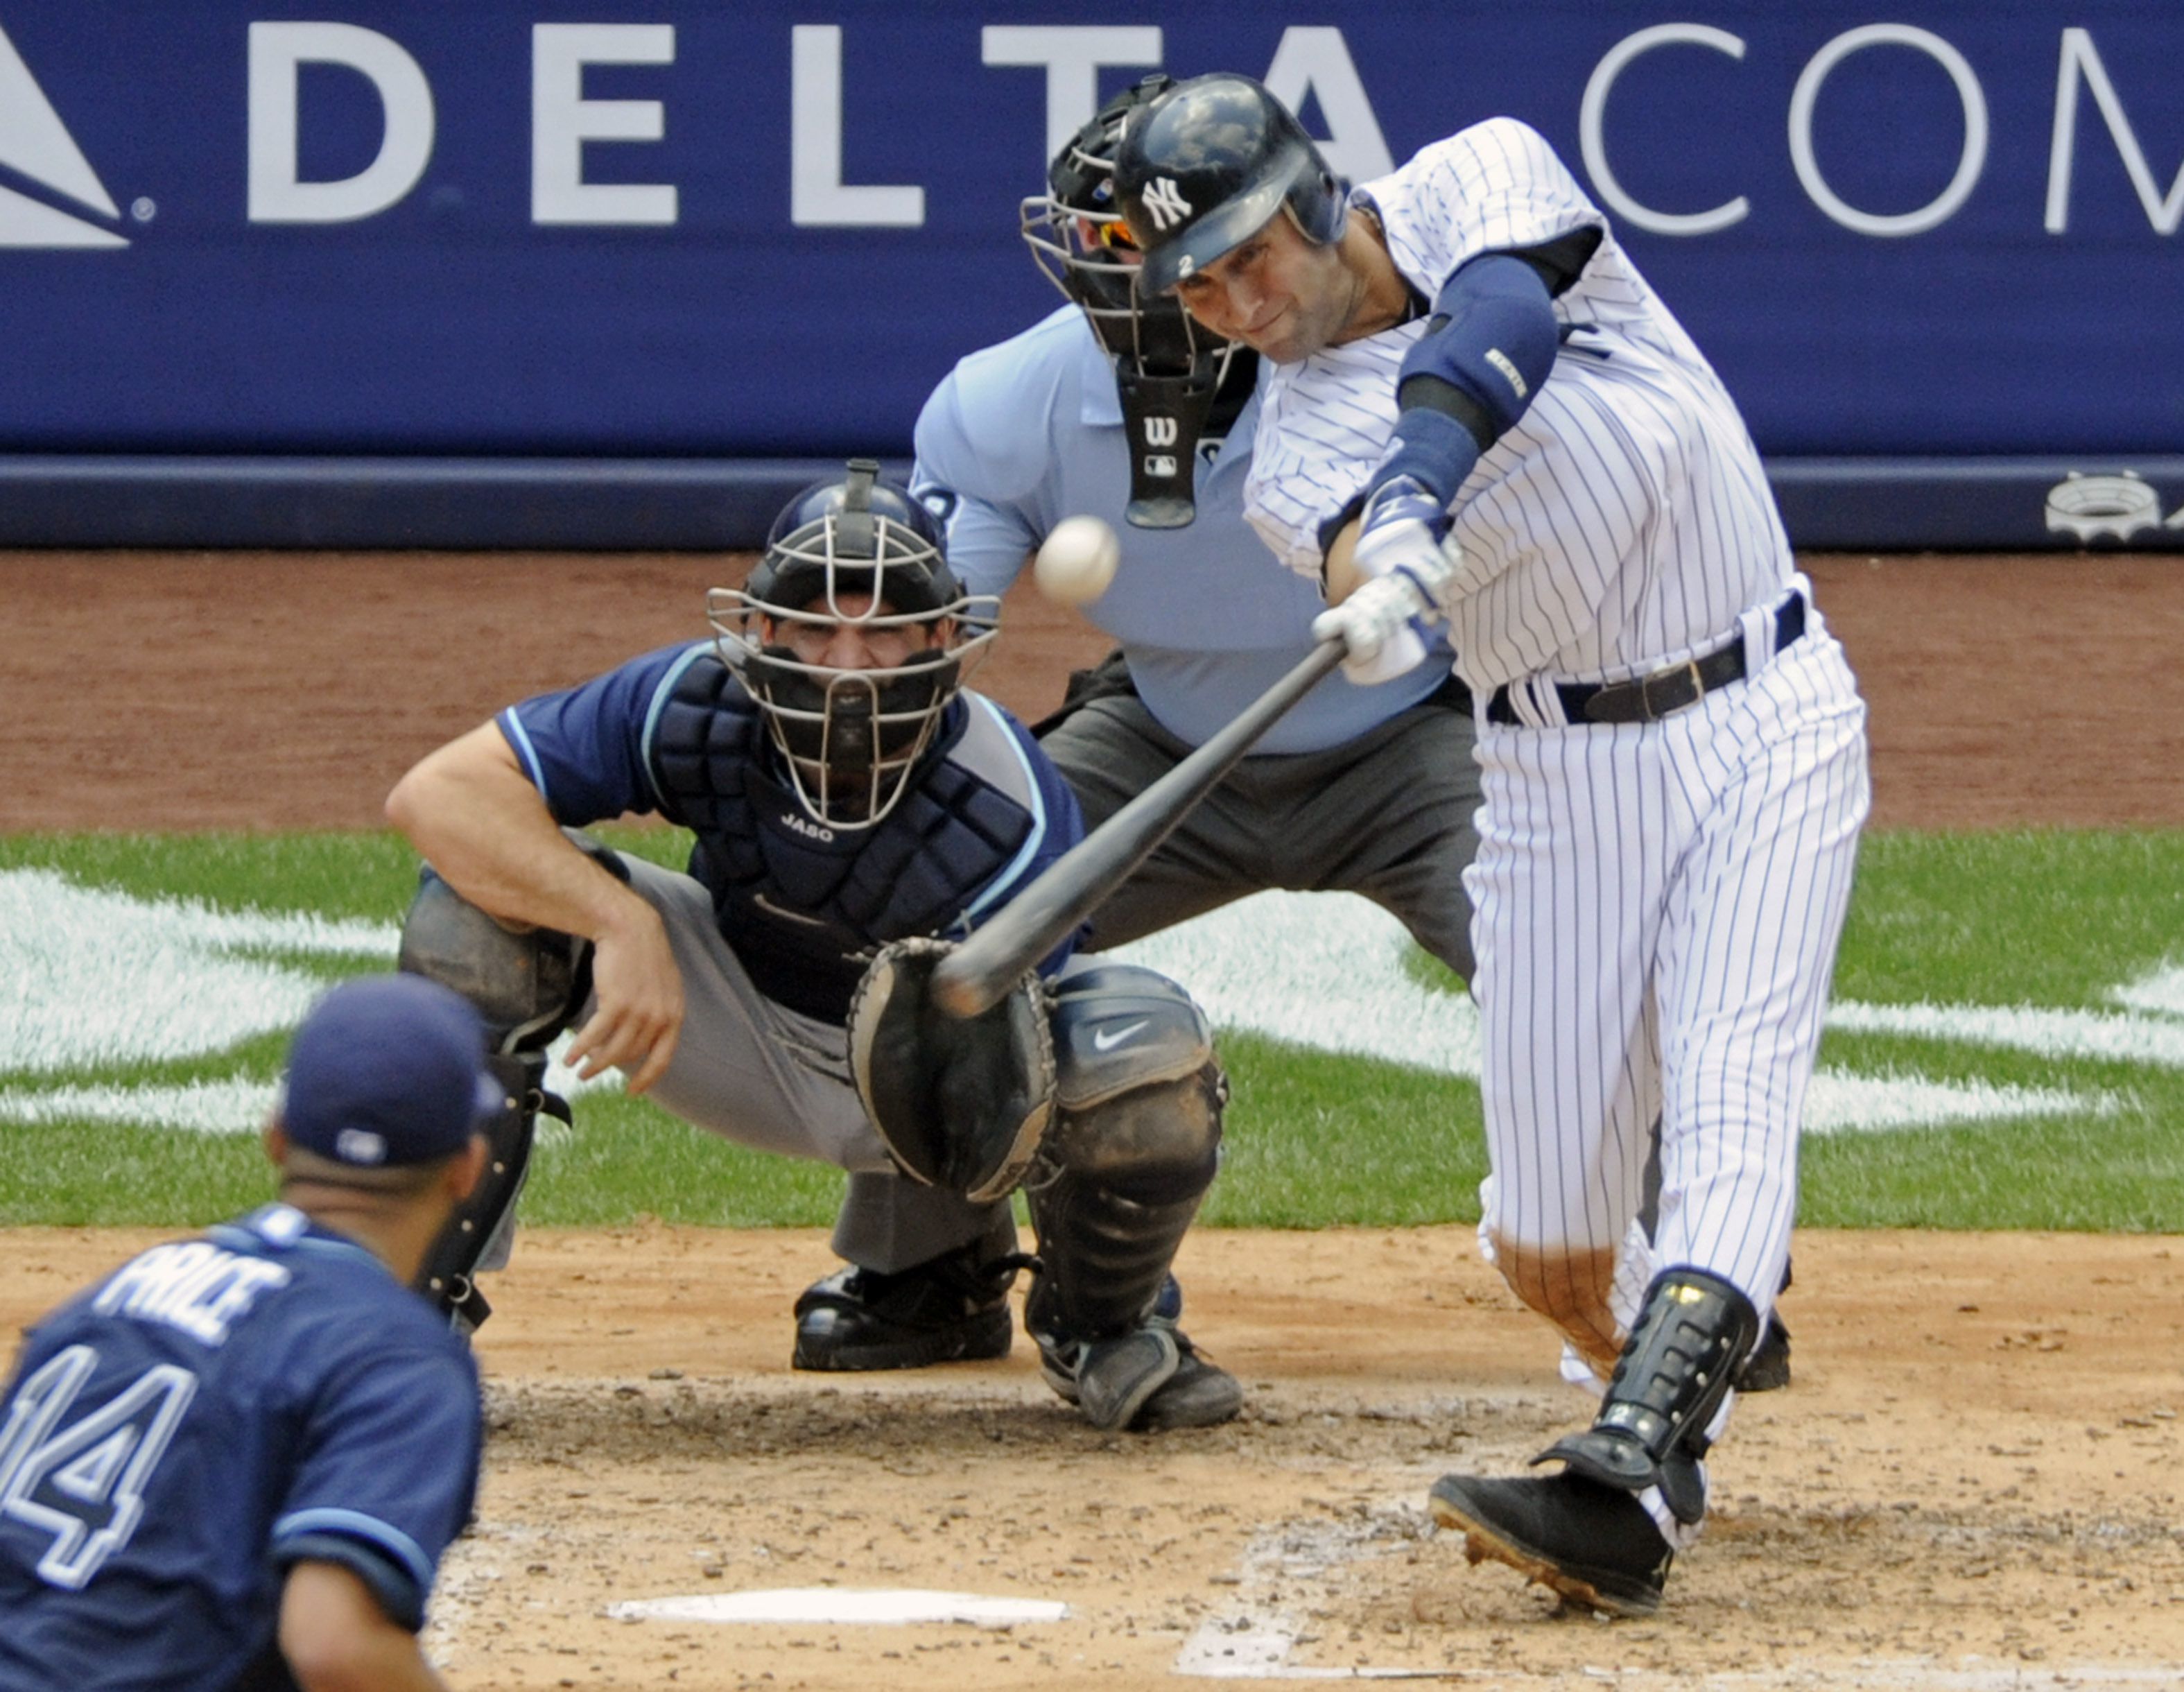 Derek Jeter leads the newcomers on the Baseball Hall of Fame